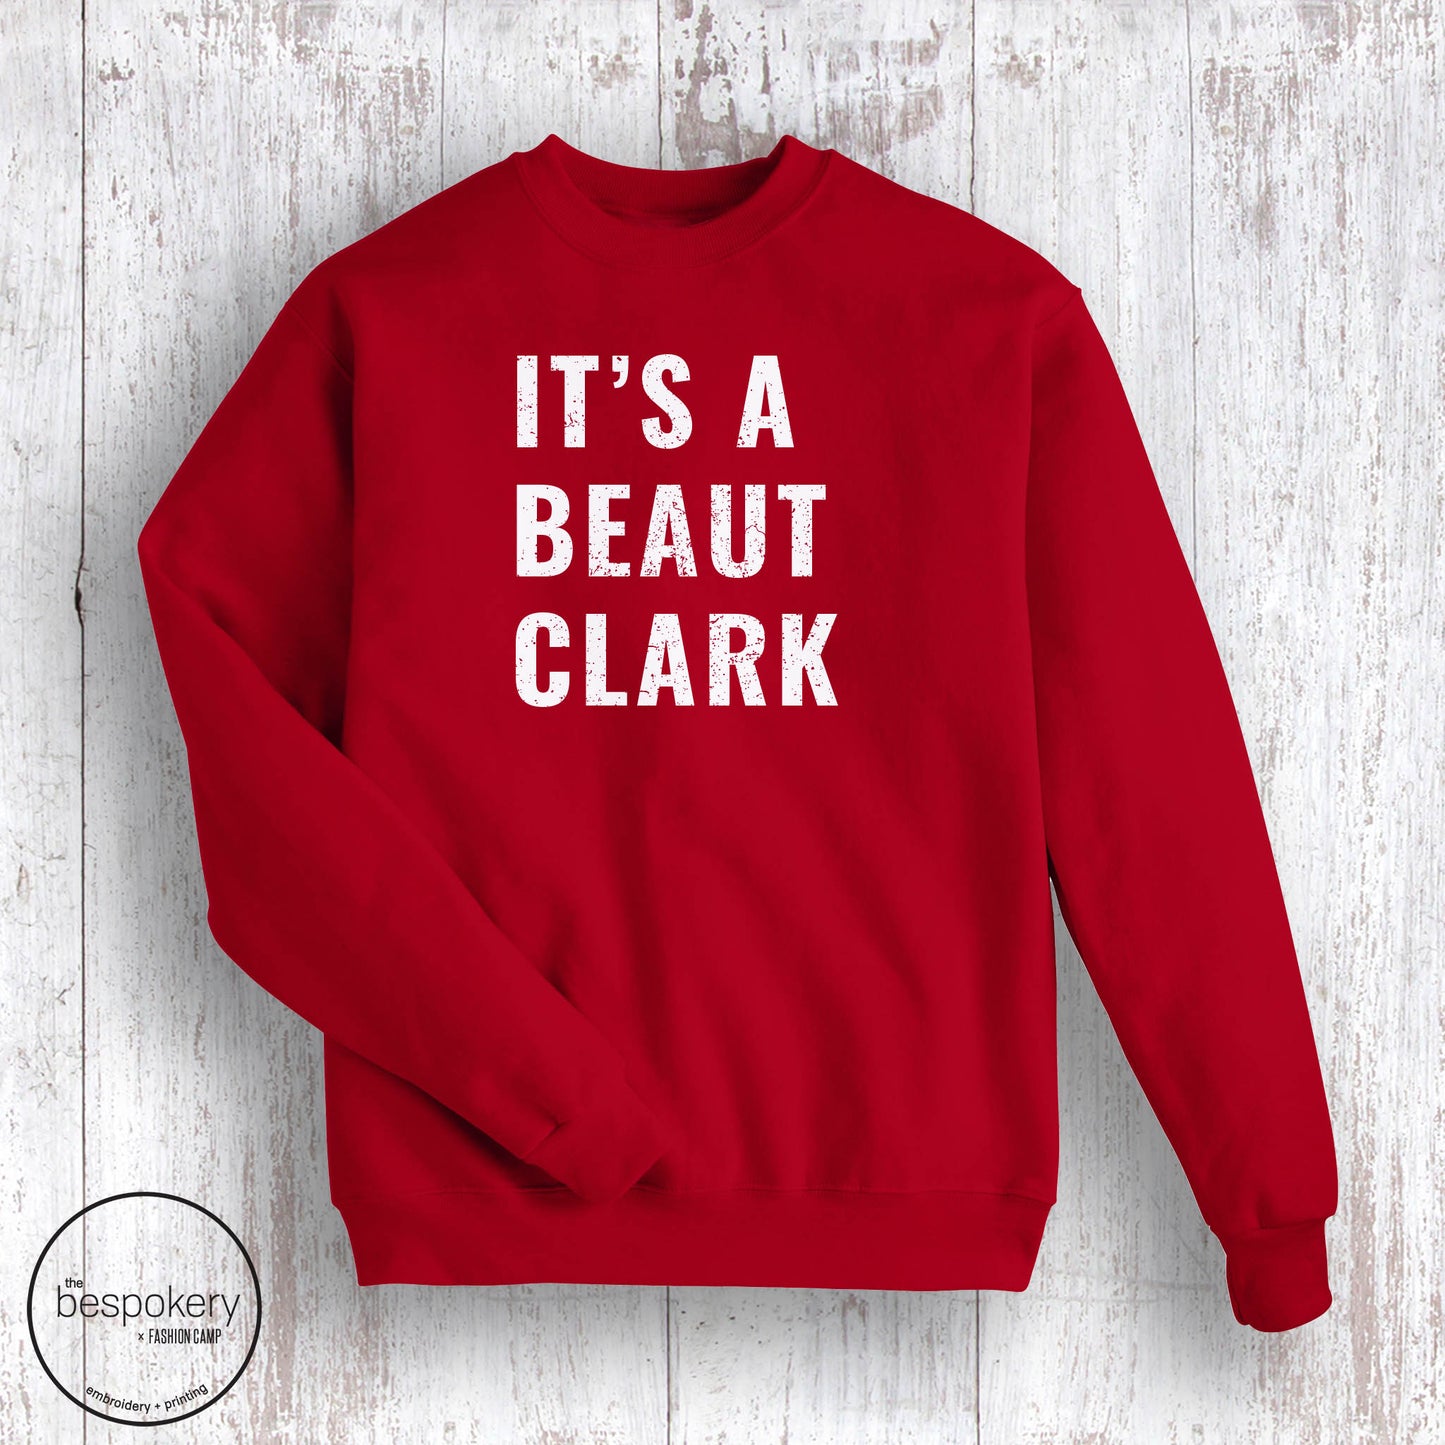 "It's A Beaut Clark" Sweatshirt- Red (Adult Only)